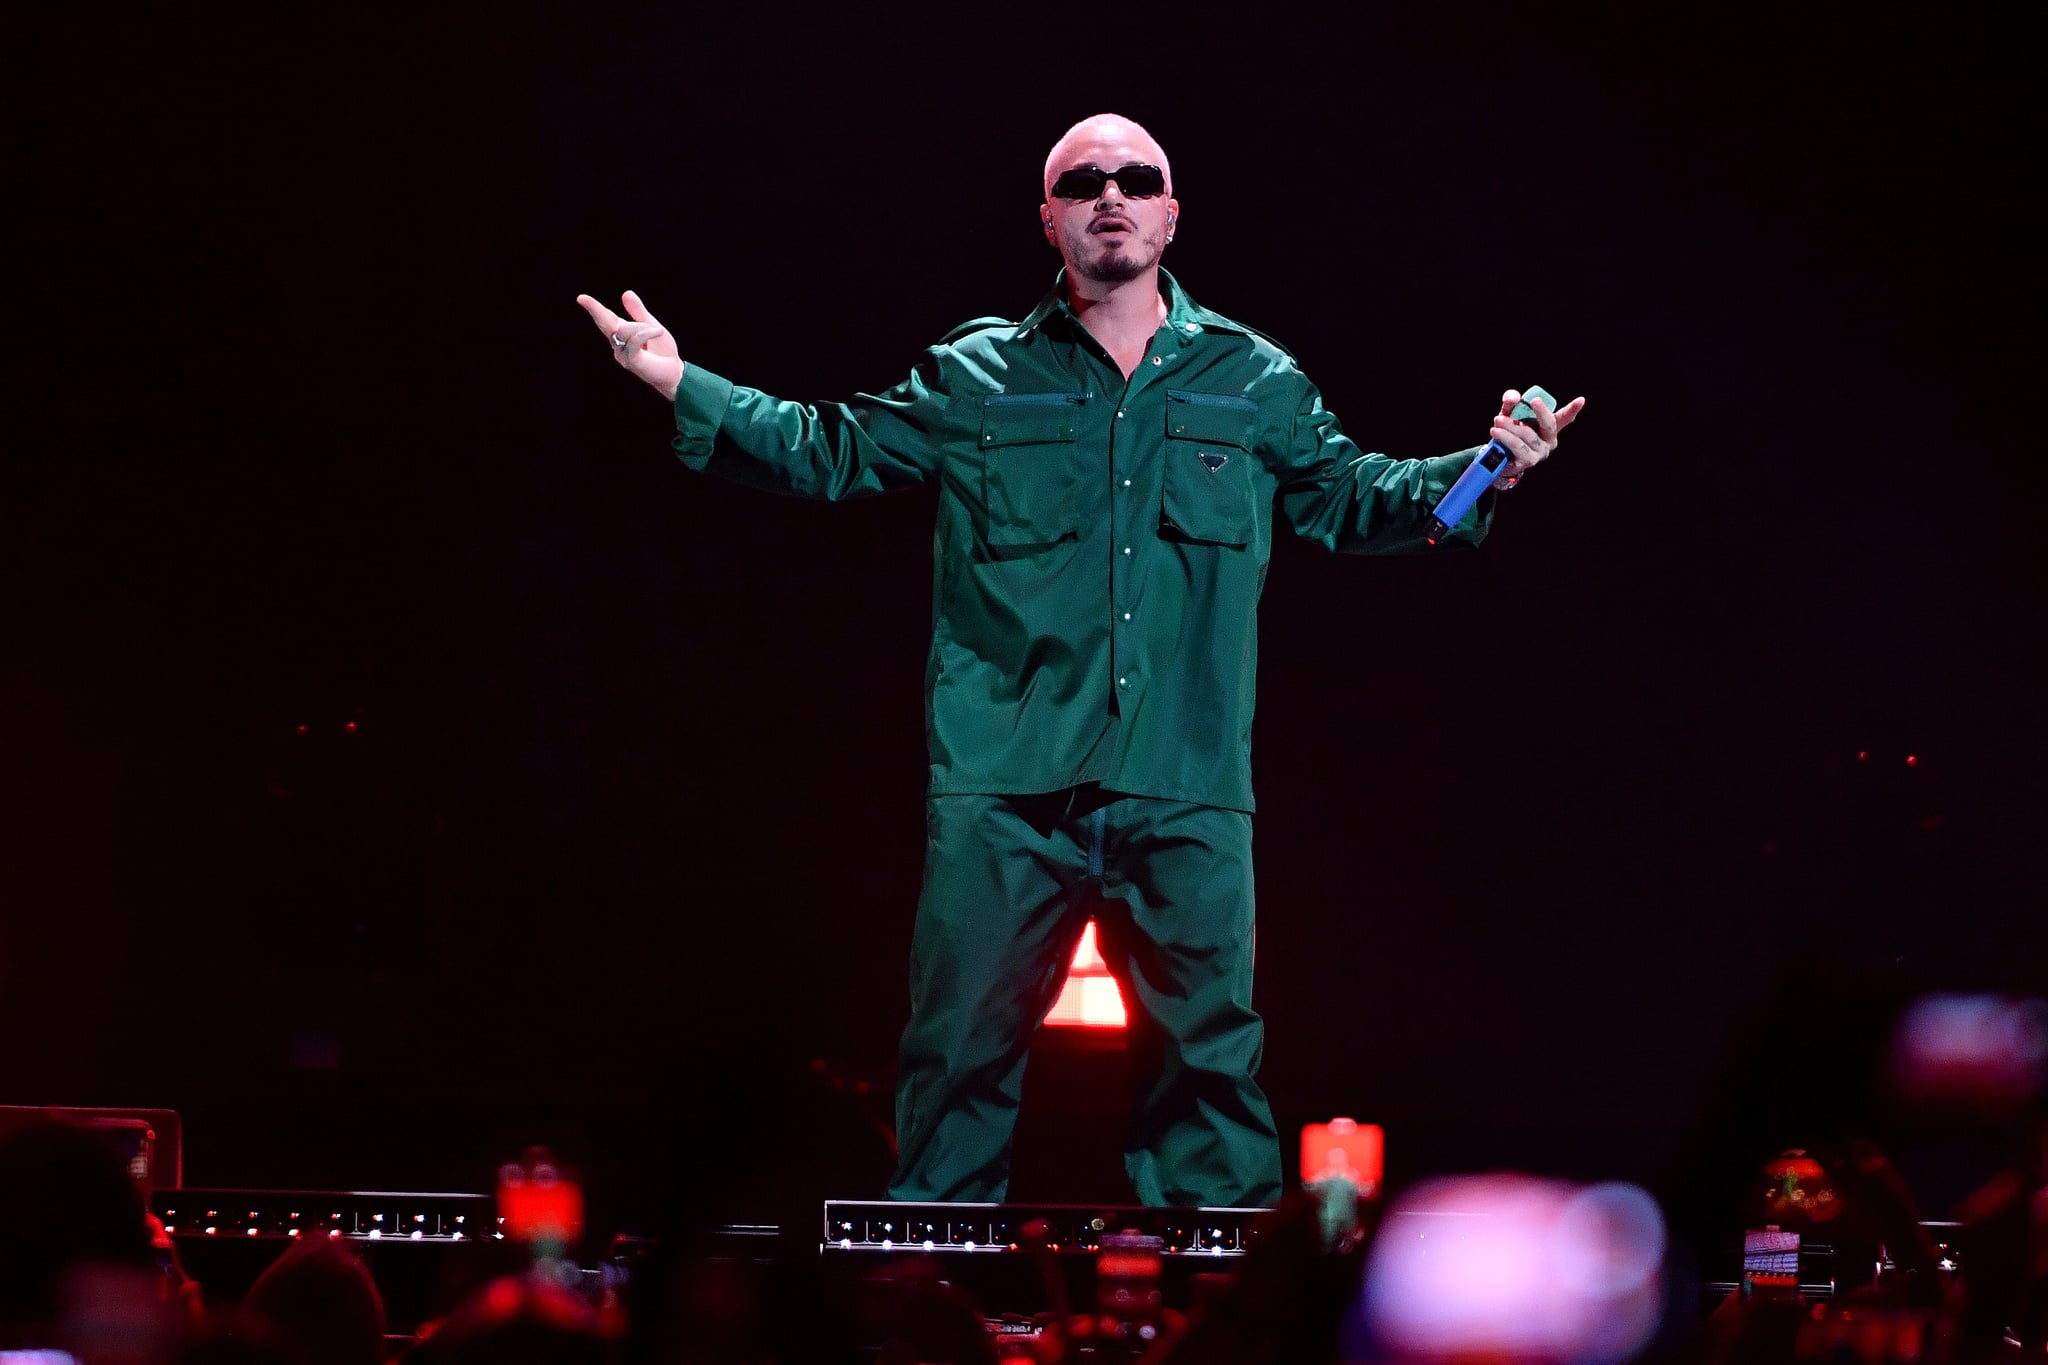 ORLANDO, FLORIDA - OCTOBER 16: J Balvin performs onstage at the 2021 iHeartRadio Fiesta Latina at the Amway Center on October 16, 2021 in Orlando, Florida.  (Photo by Jason Koerner/Getty Images for iHeartRadio)